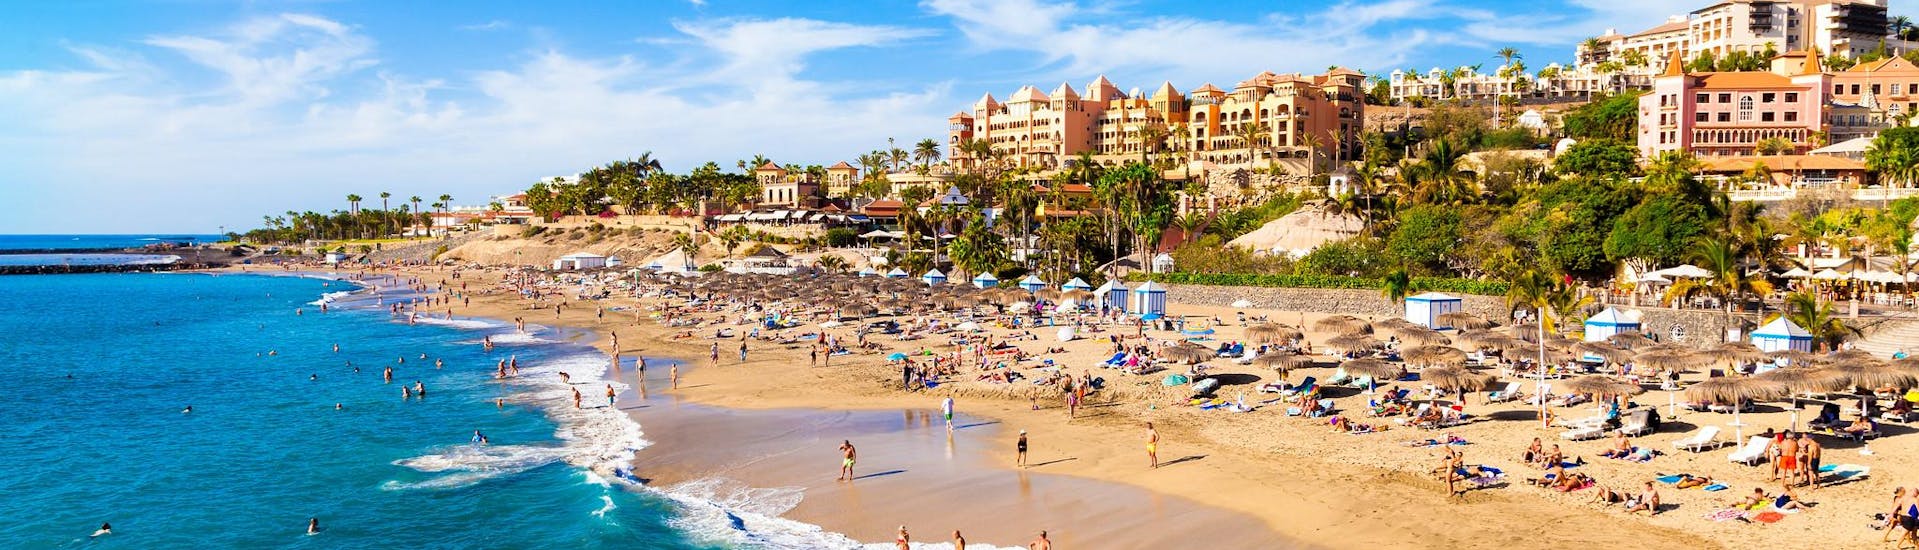 A beach in Costa Adeje on Tenerife where many water sports activities take place.